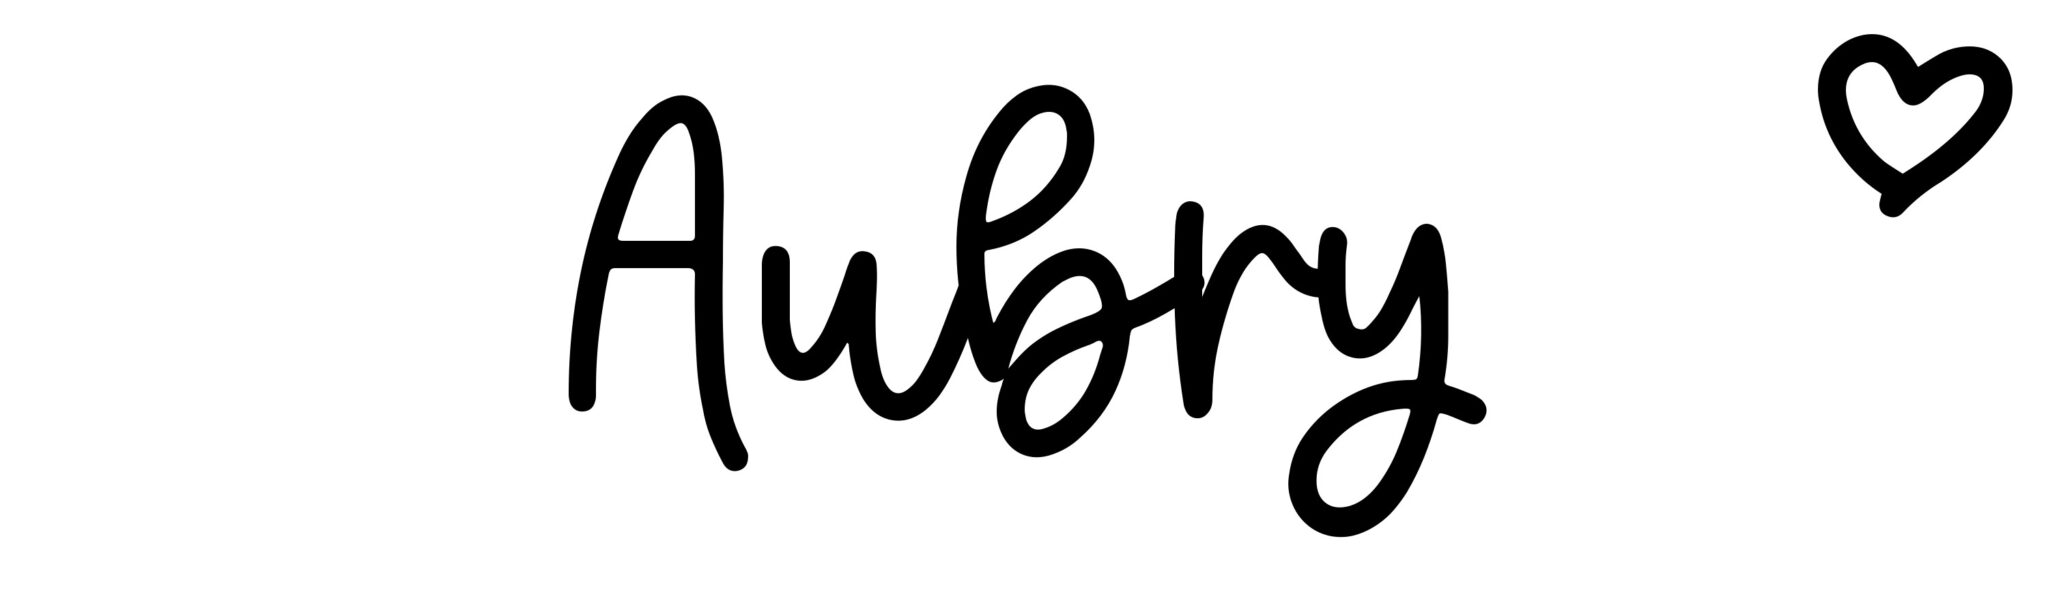 Aubry - Name meaning, origin, variations and more